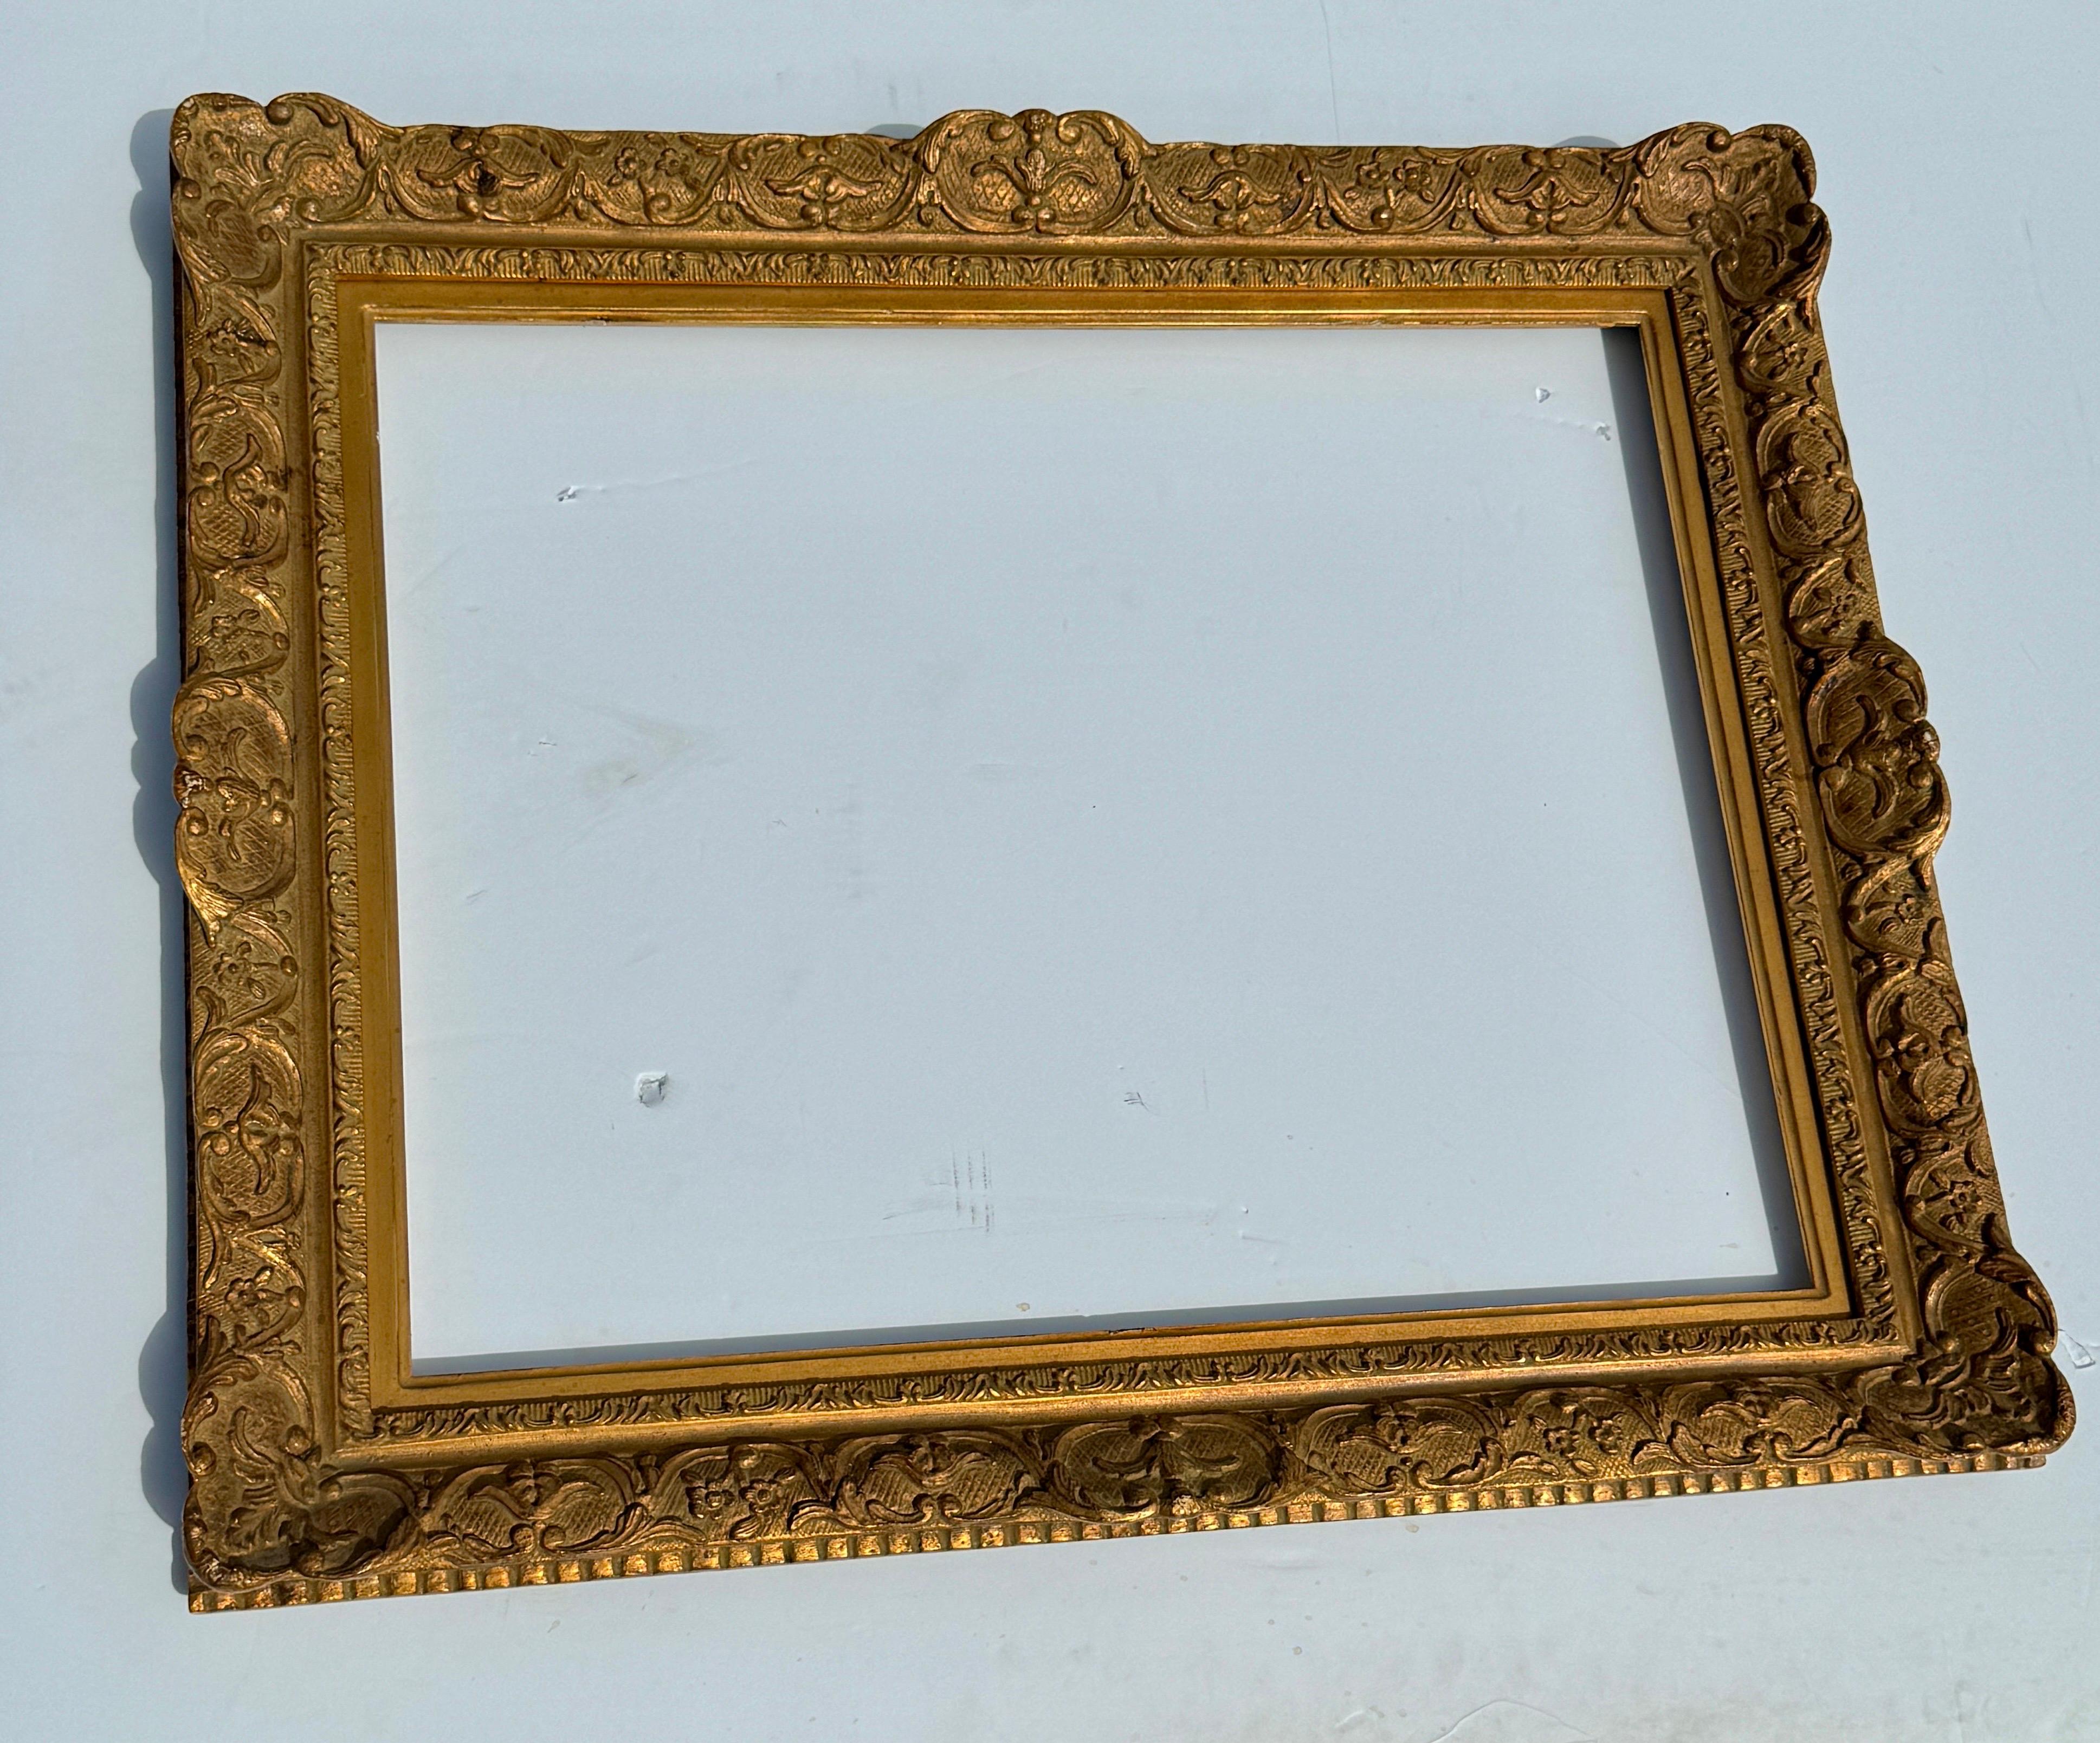 Large Ornate French Rococo Style Carved Ornate Gilt Wood Frame.

This gorgeous hand-crafted frame has lots of charming details including shell motifs and cross hatch features. This substantial piece could be used for a 24inx30in oil painting as well